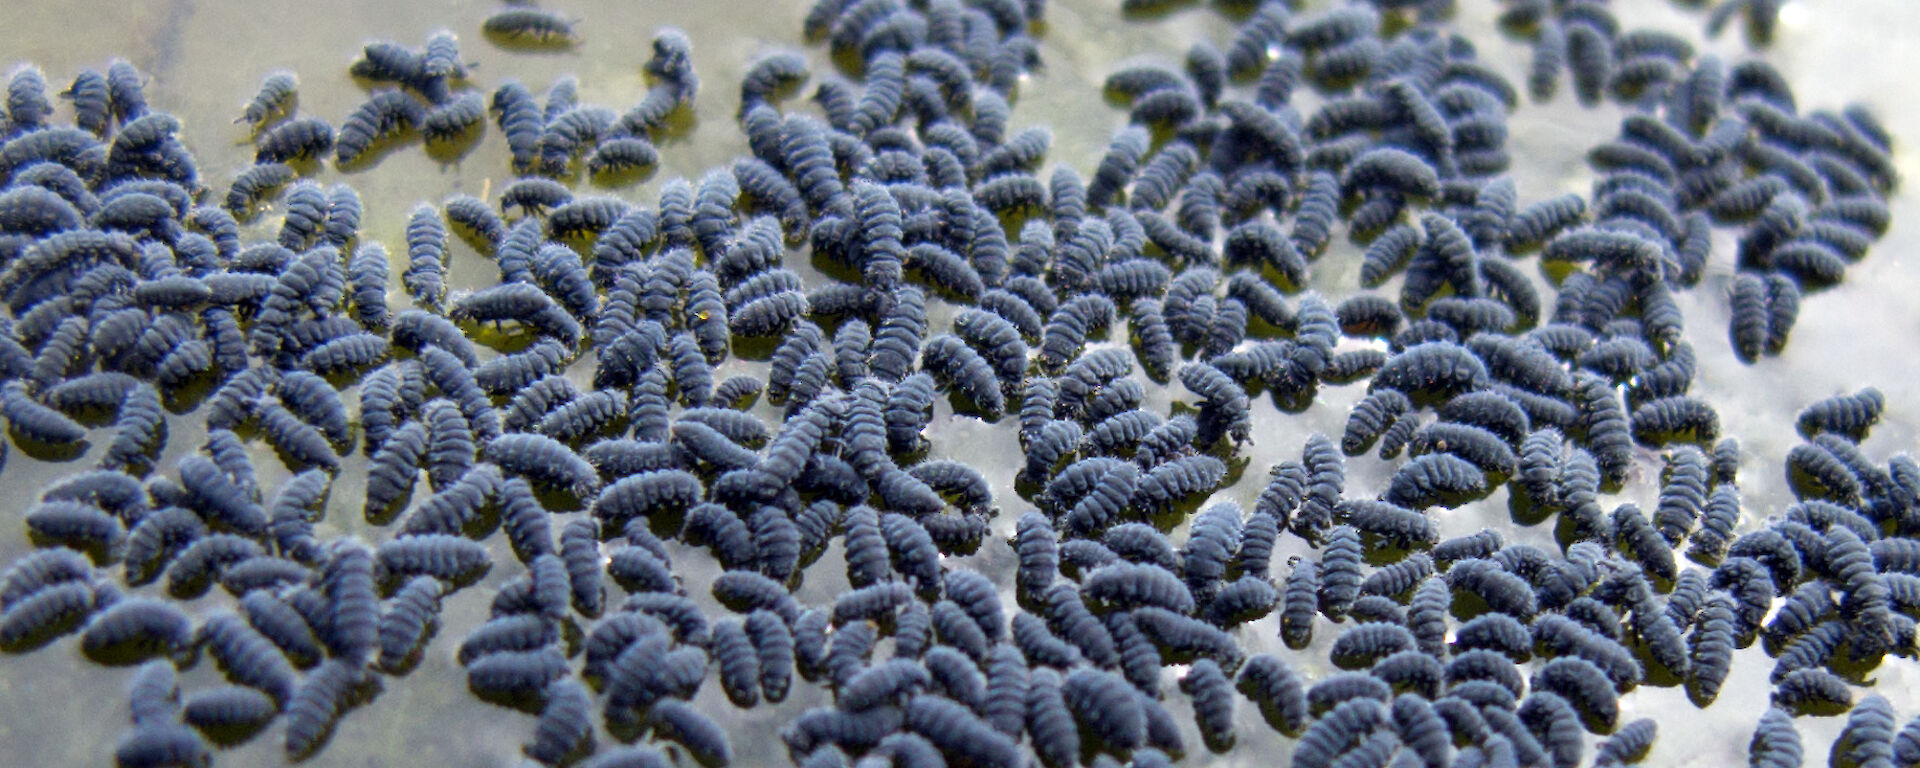 A group of small grey insect-like hexapods.